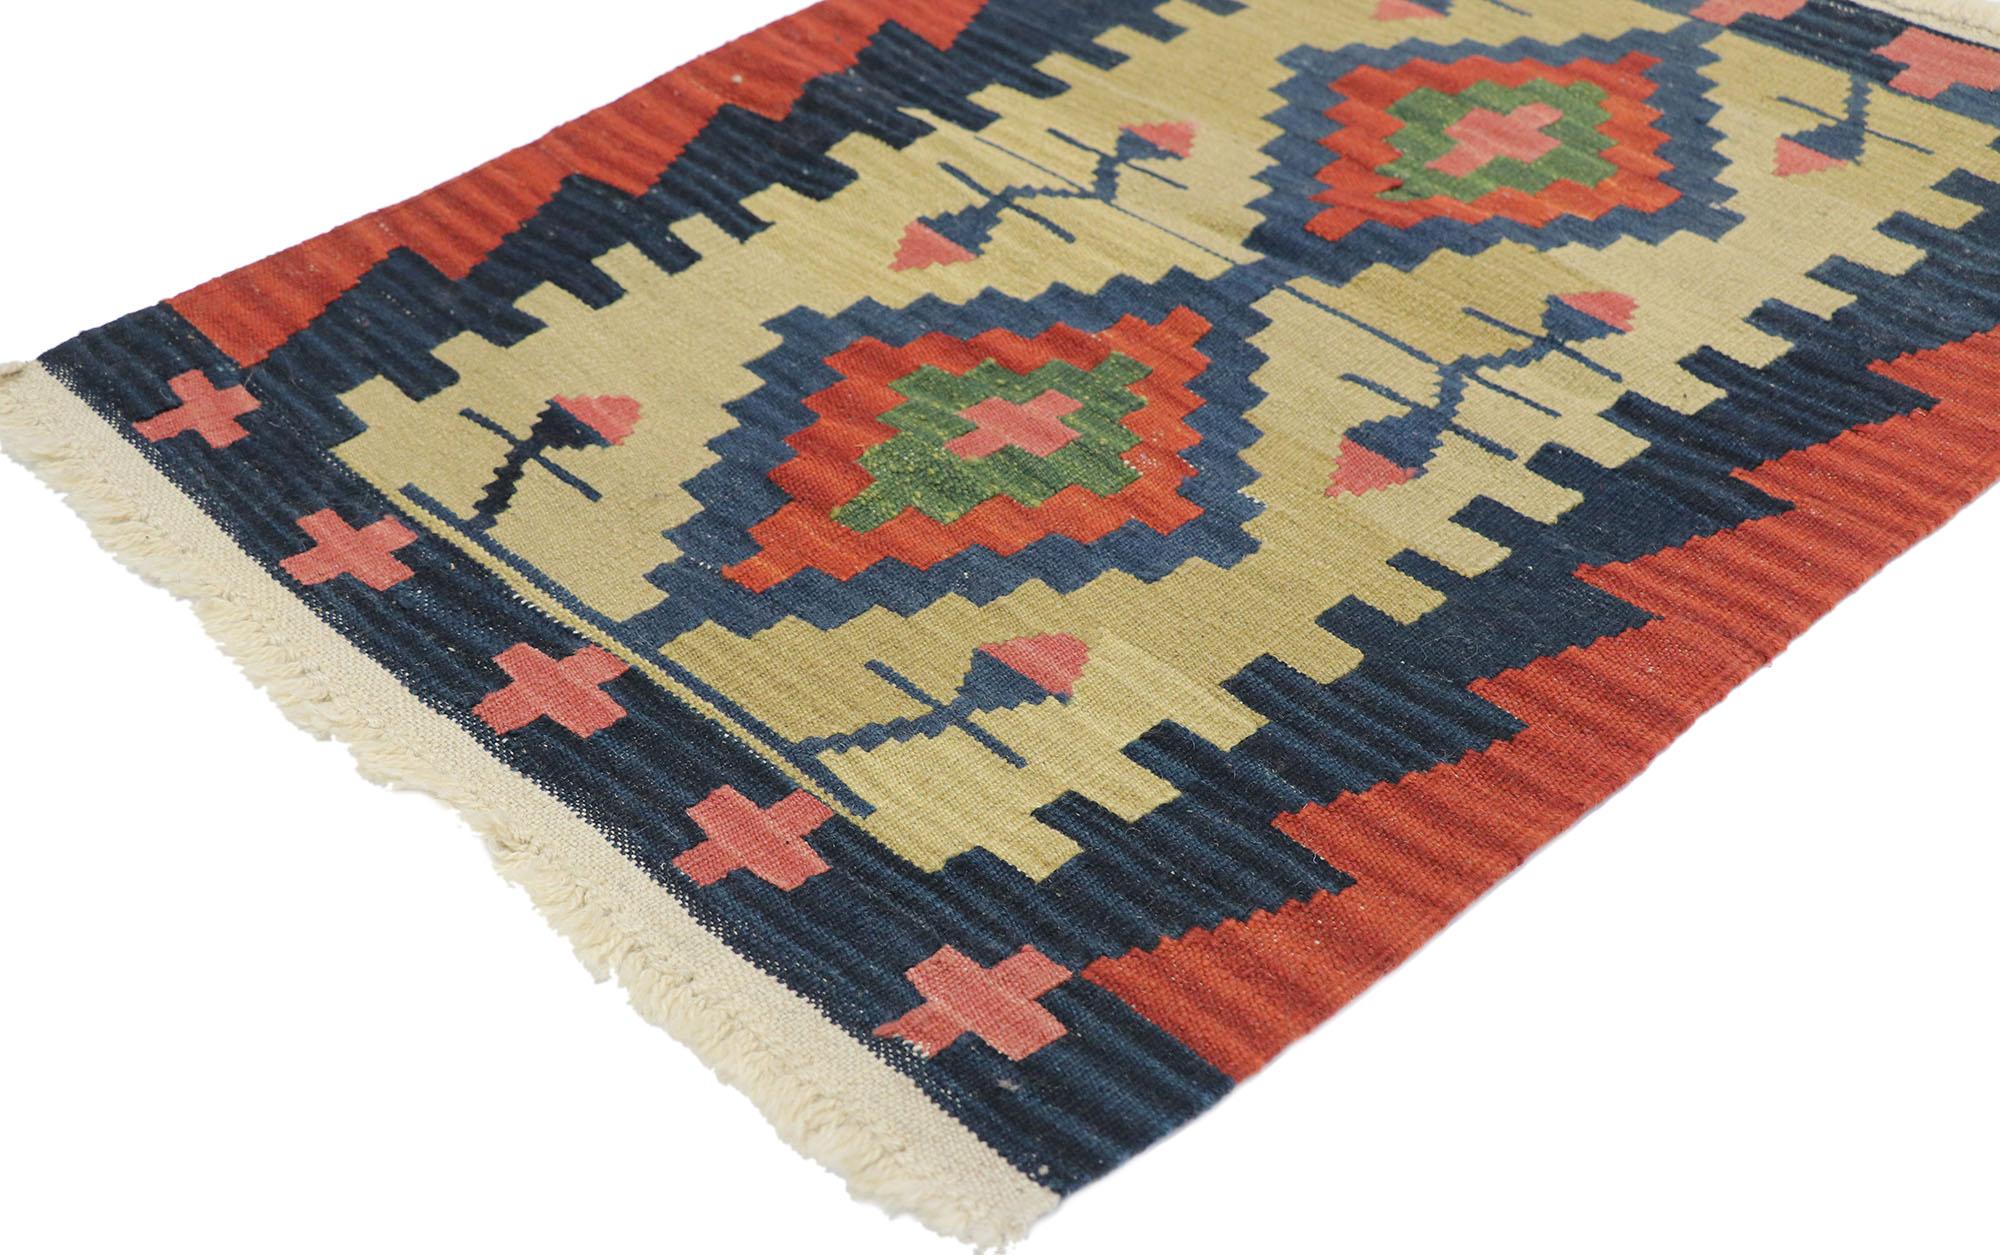 77909, vintage Persian Shiraz Kilim rug with Tribal style. Full of tiny details and a bold expressive design combined with vibrant colors and tribal style, this hand-woven wool vintage Persian Shiraz kilim rug is a captivating vision of woven